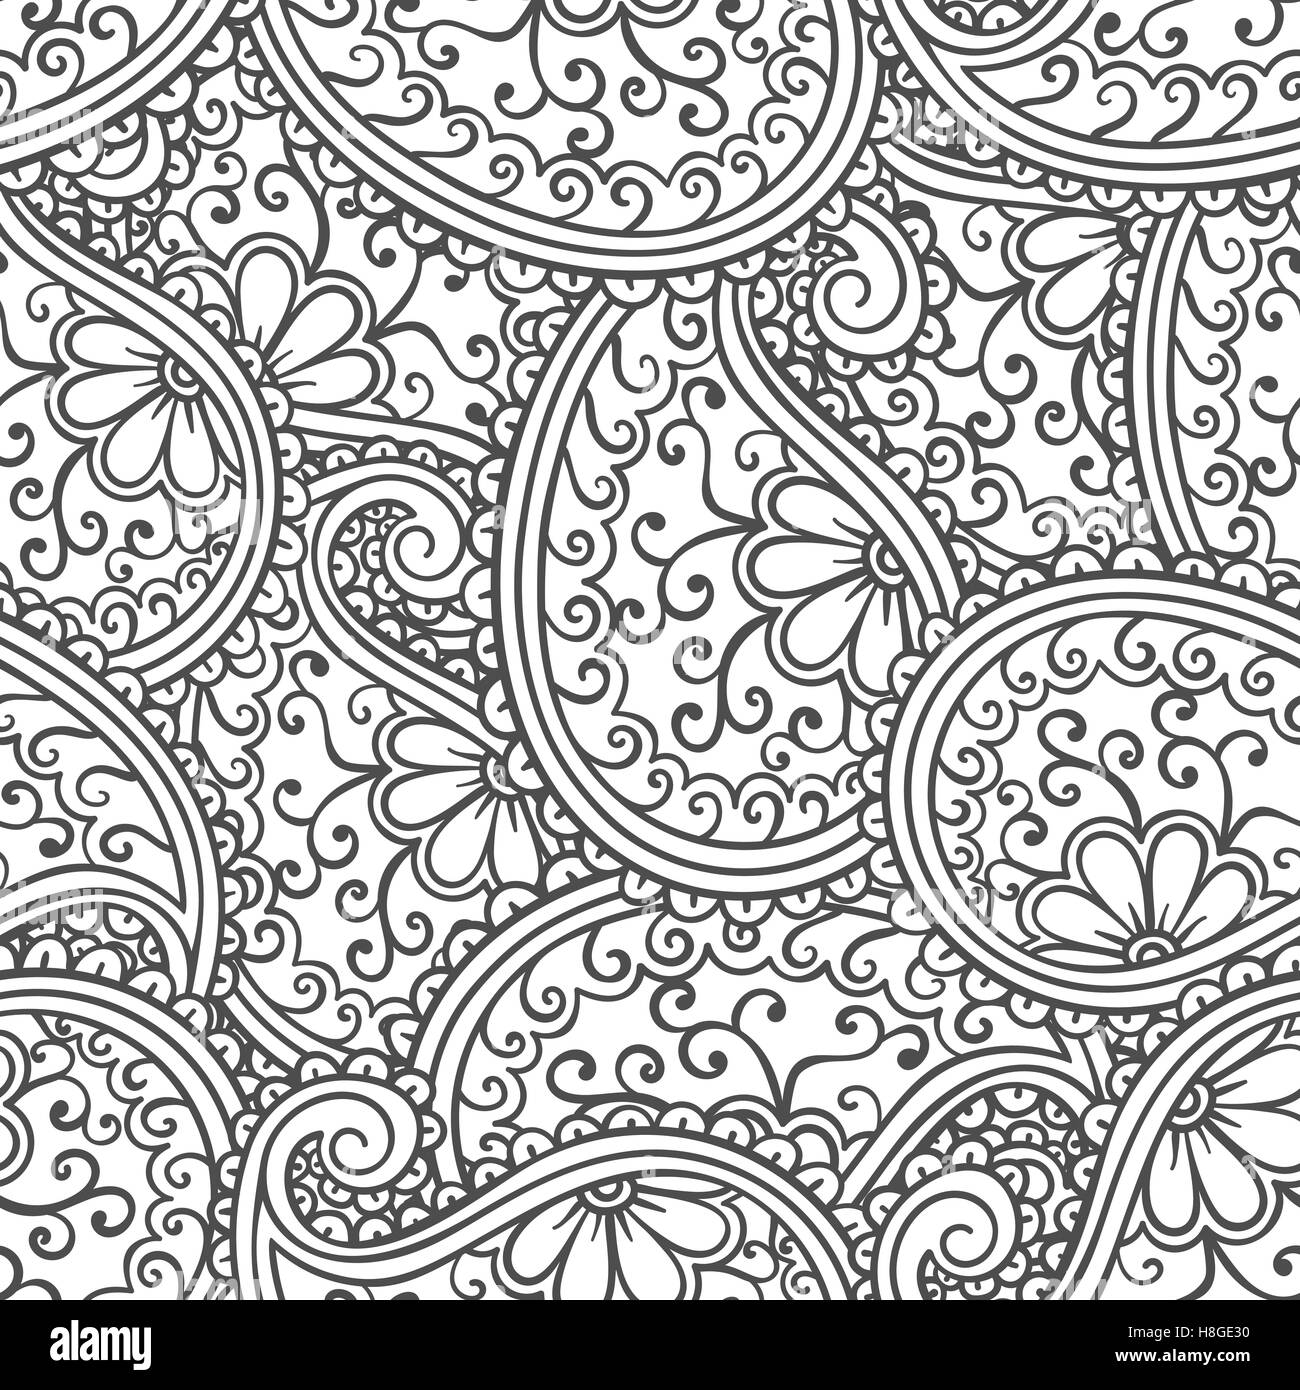 Hand drawn seamless Paisley pattern. Doodle style Stock Vector